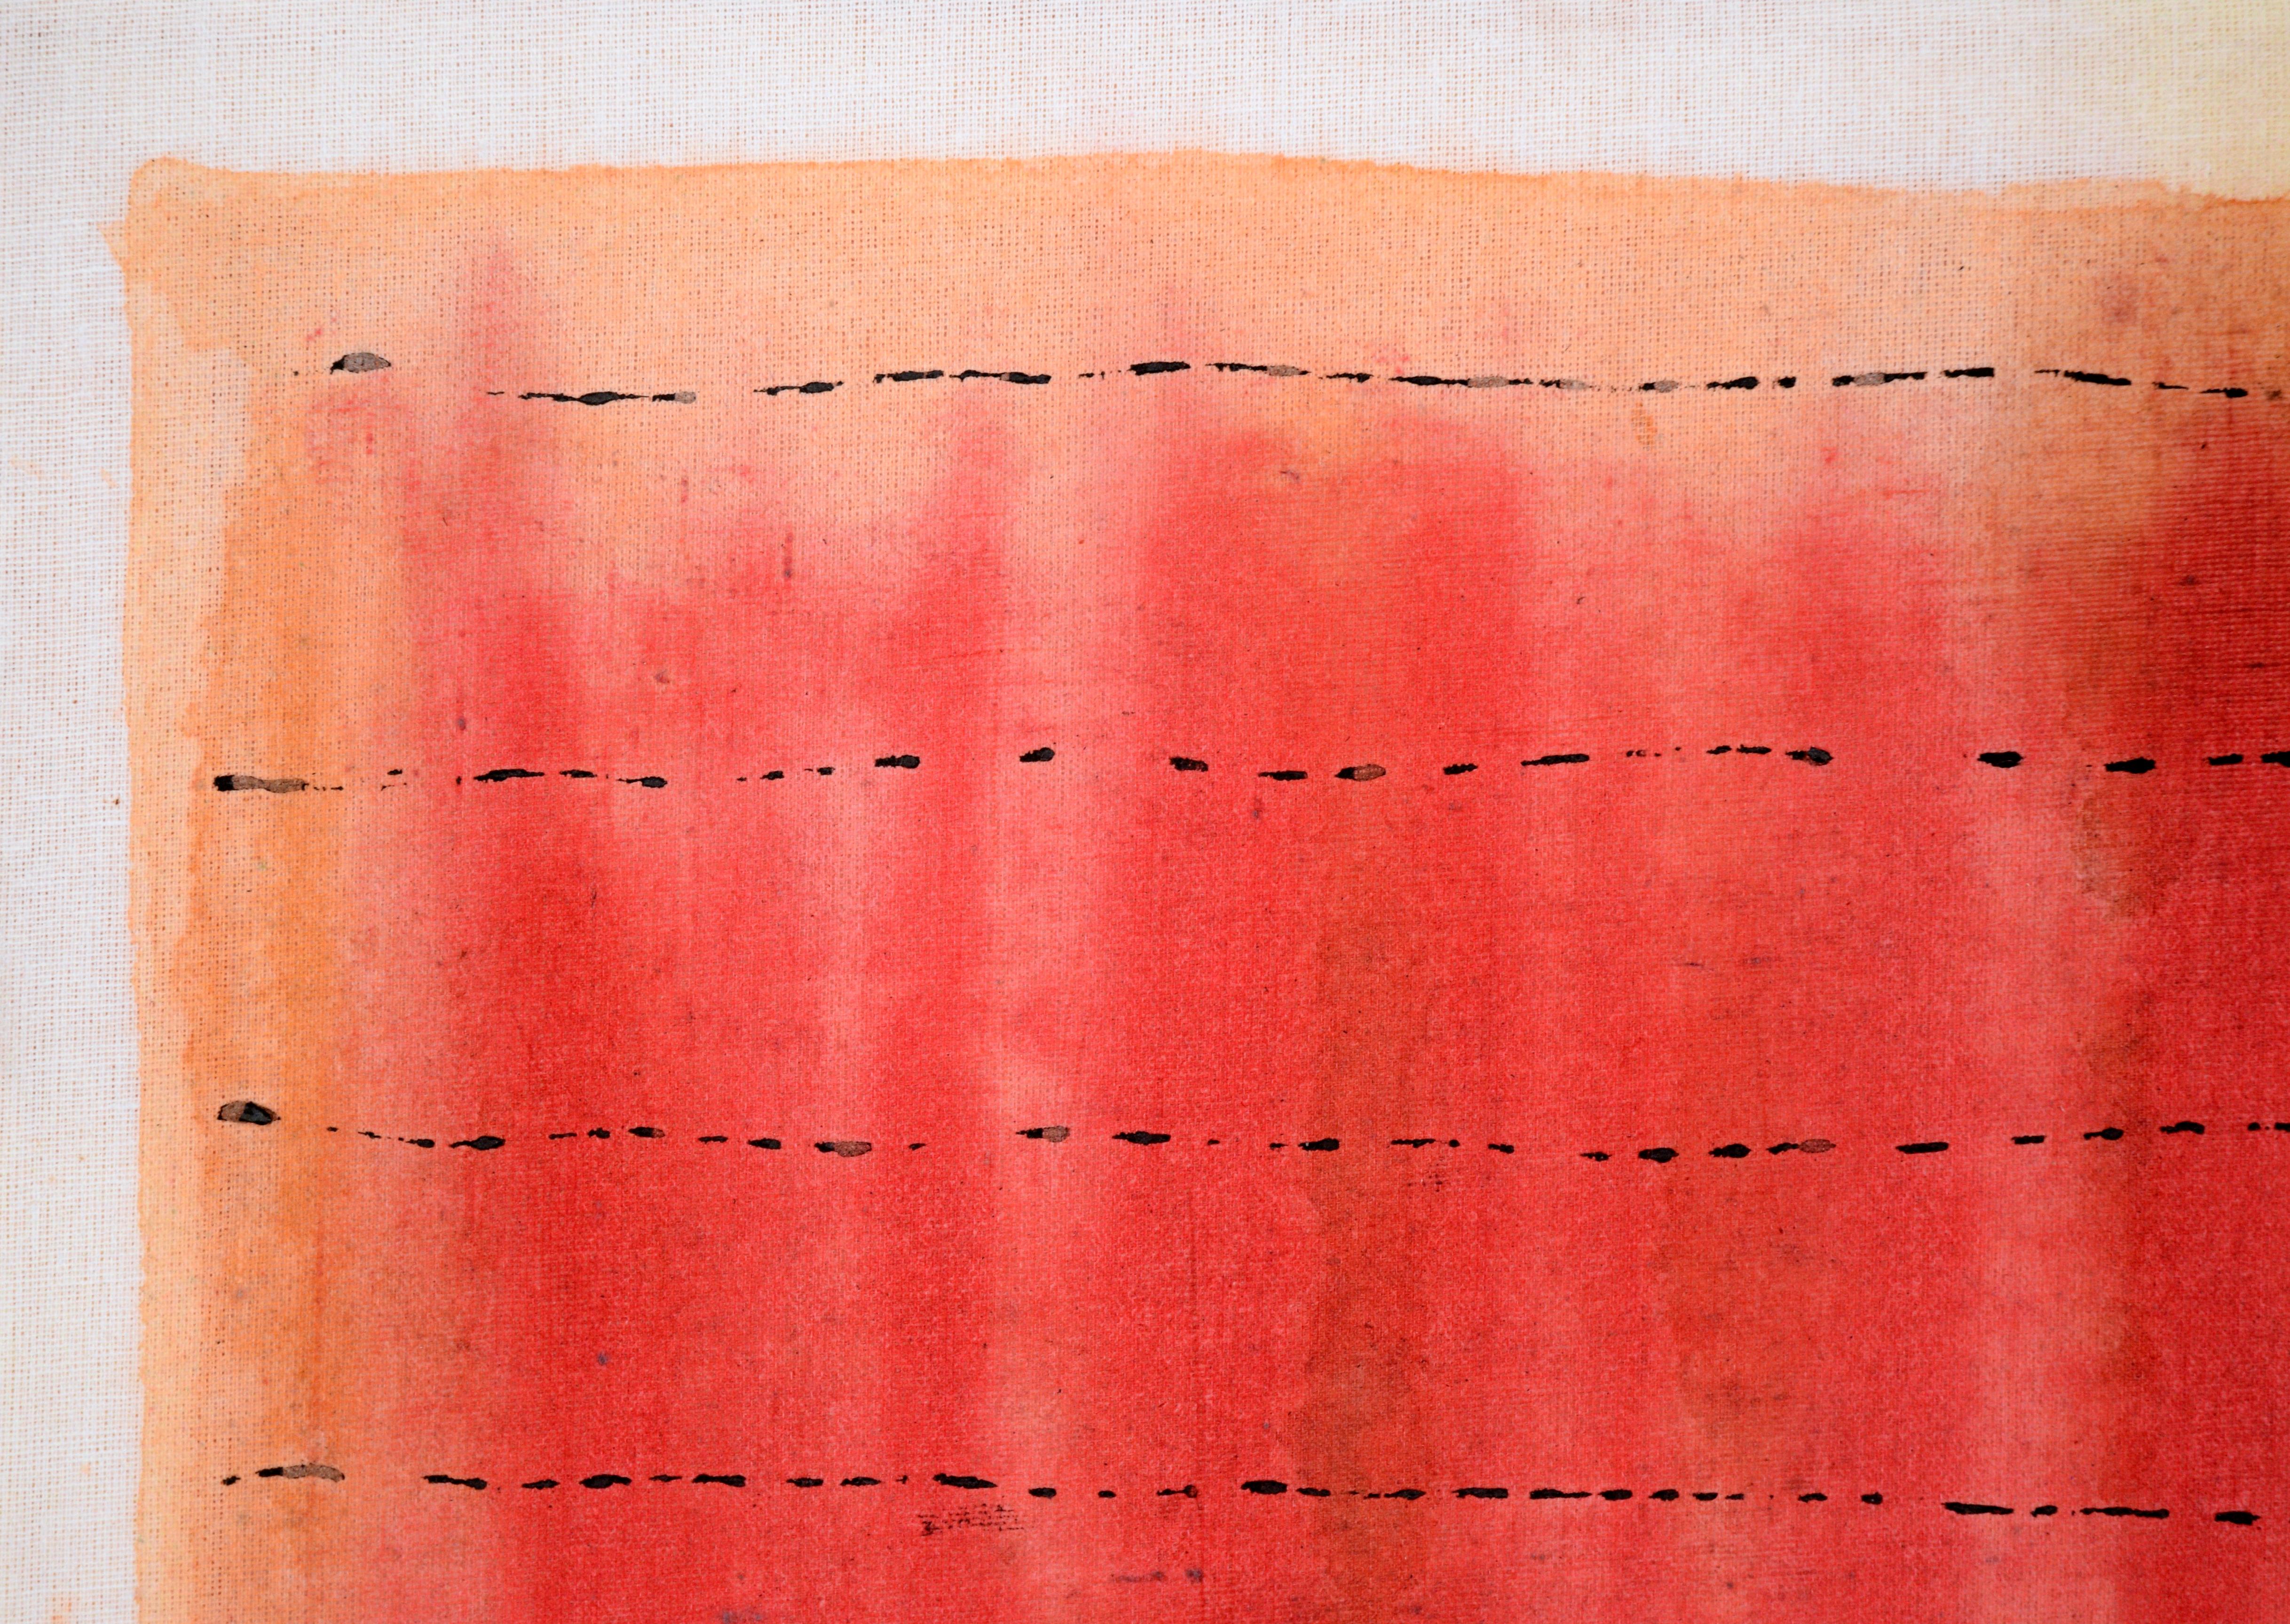 Black Lines Across a Red Field - Abstract Composition on Starched Linen - Abstract Expressionist Painting by D Whalen